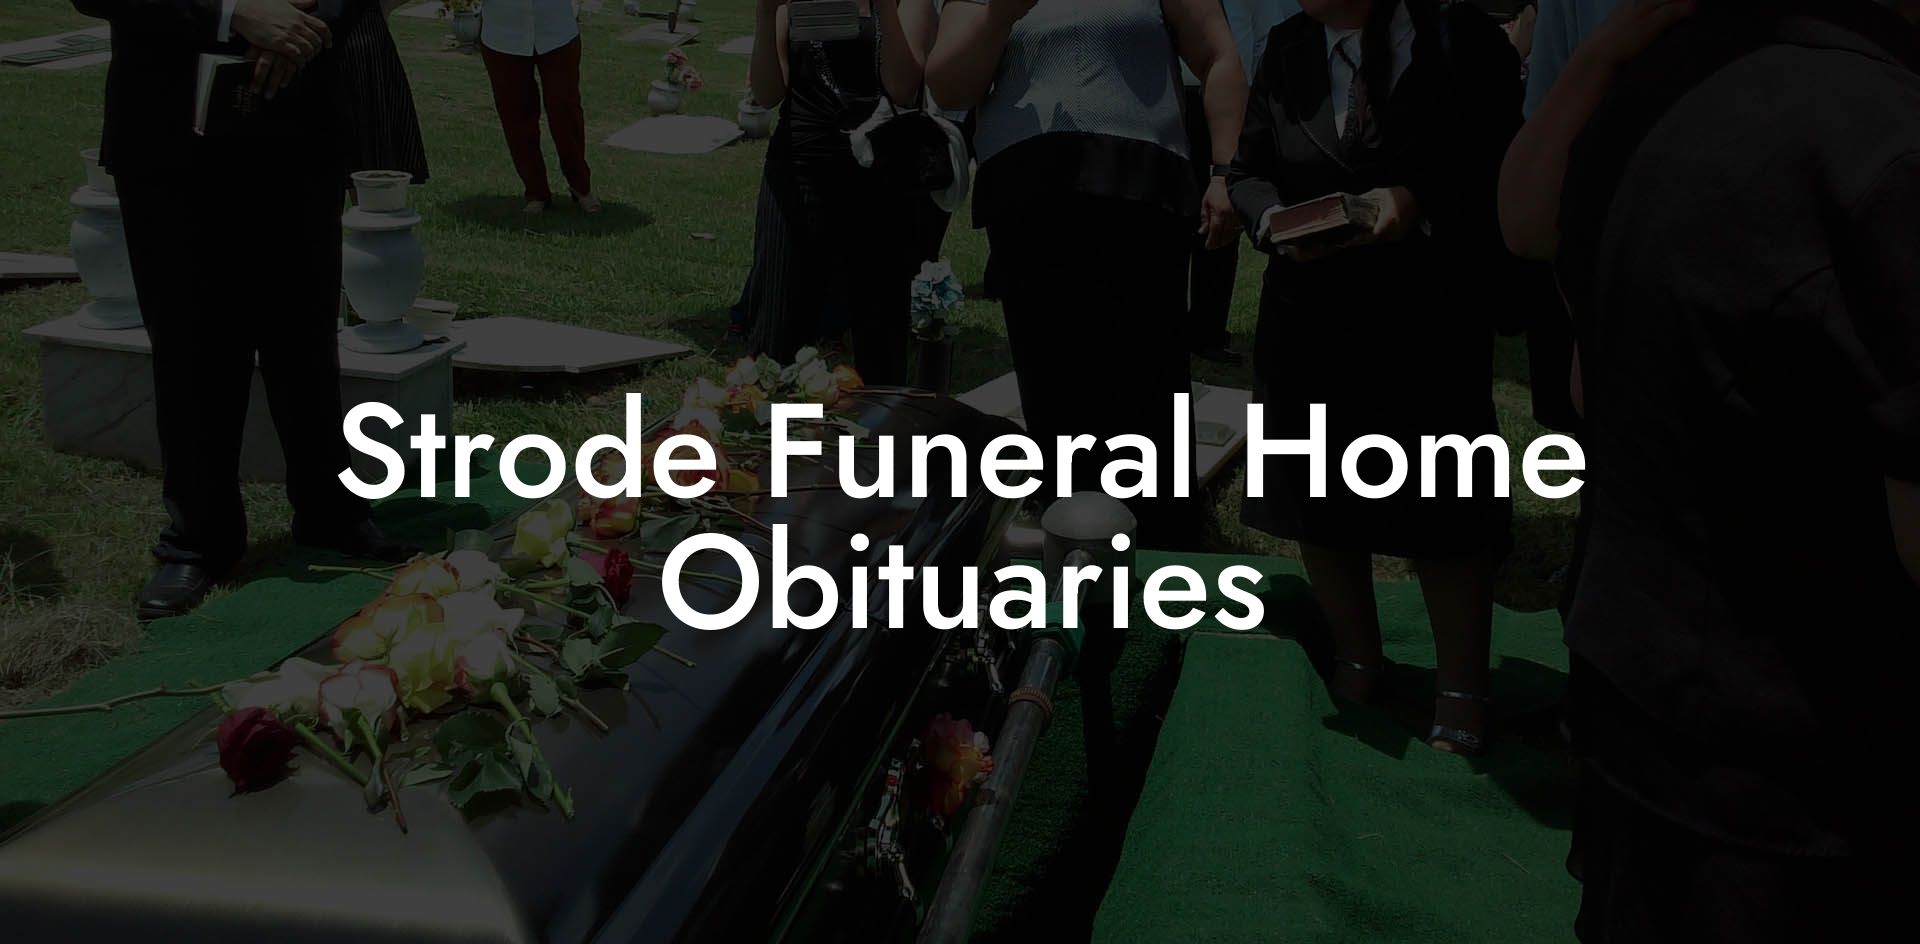 Strode Funeral Home Obituaries